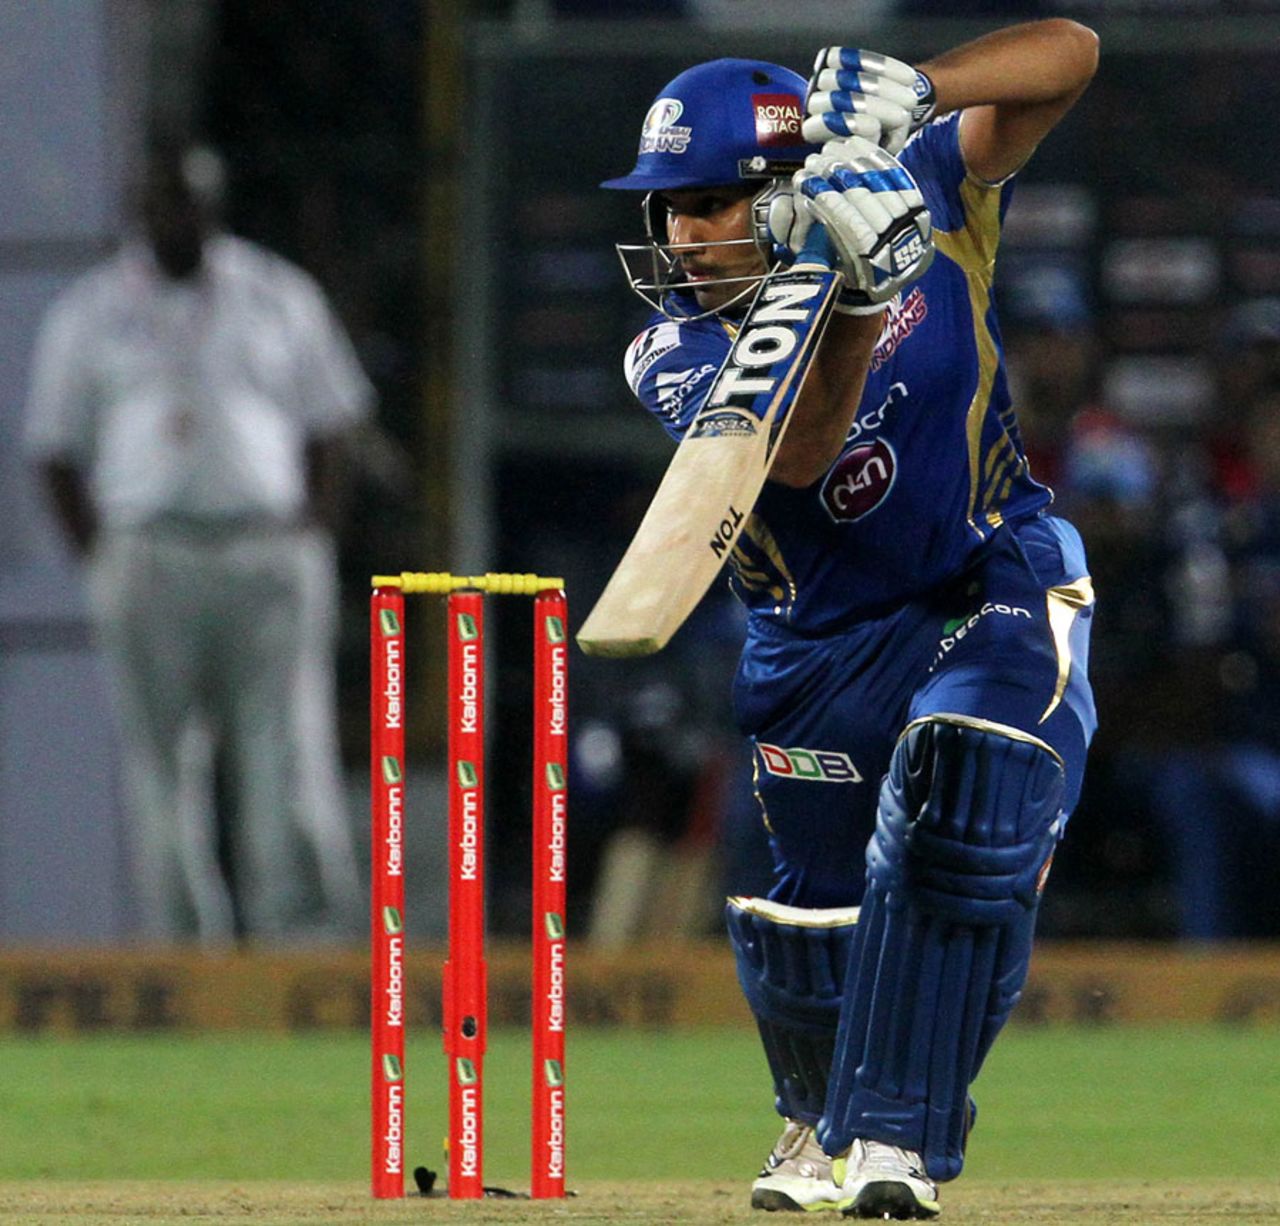 Rohit Sharma guides one through the covers, Mumbai Indians v Rajasthan Royals, Champions League 2013, Mohali, September 21, 2013